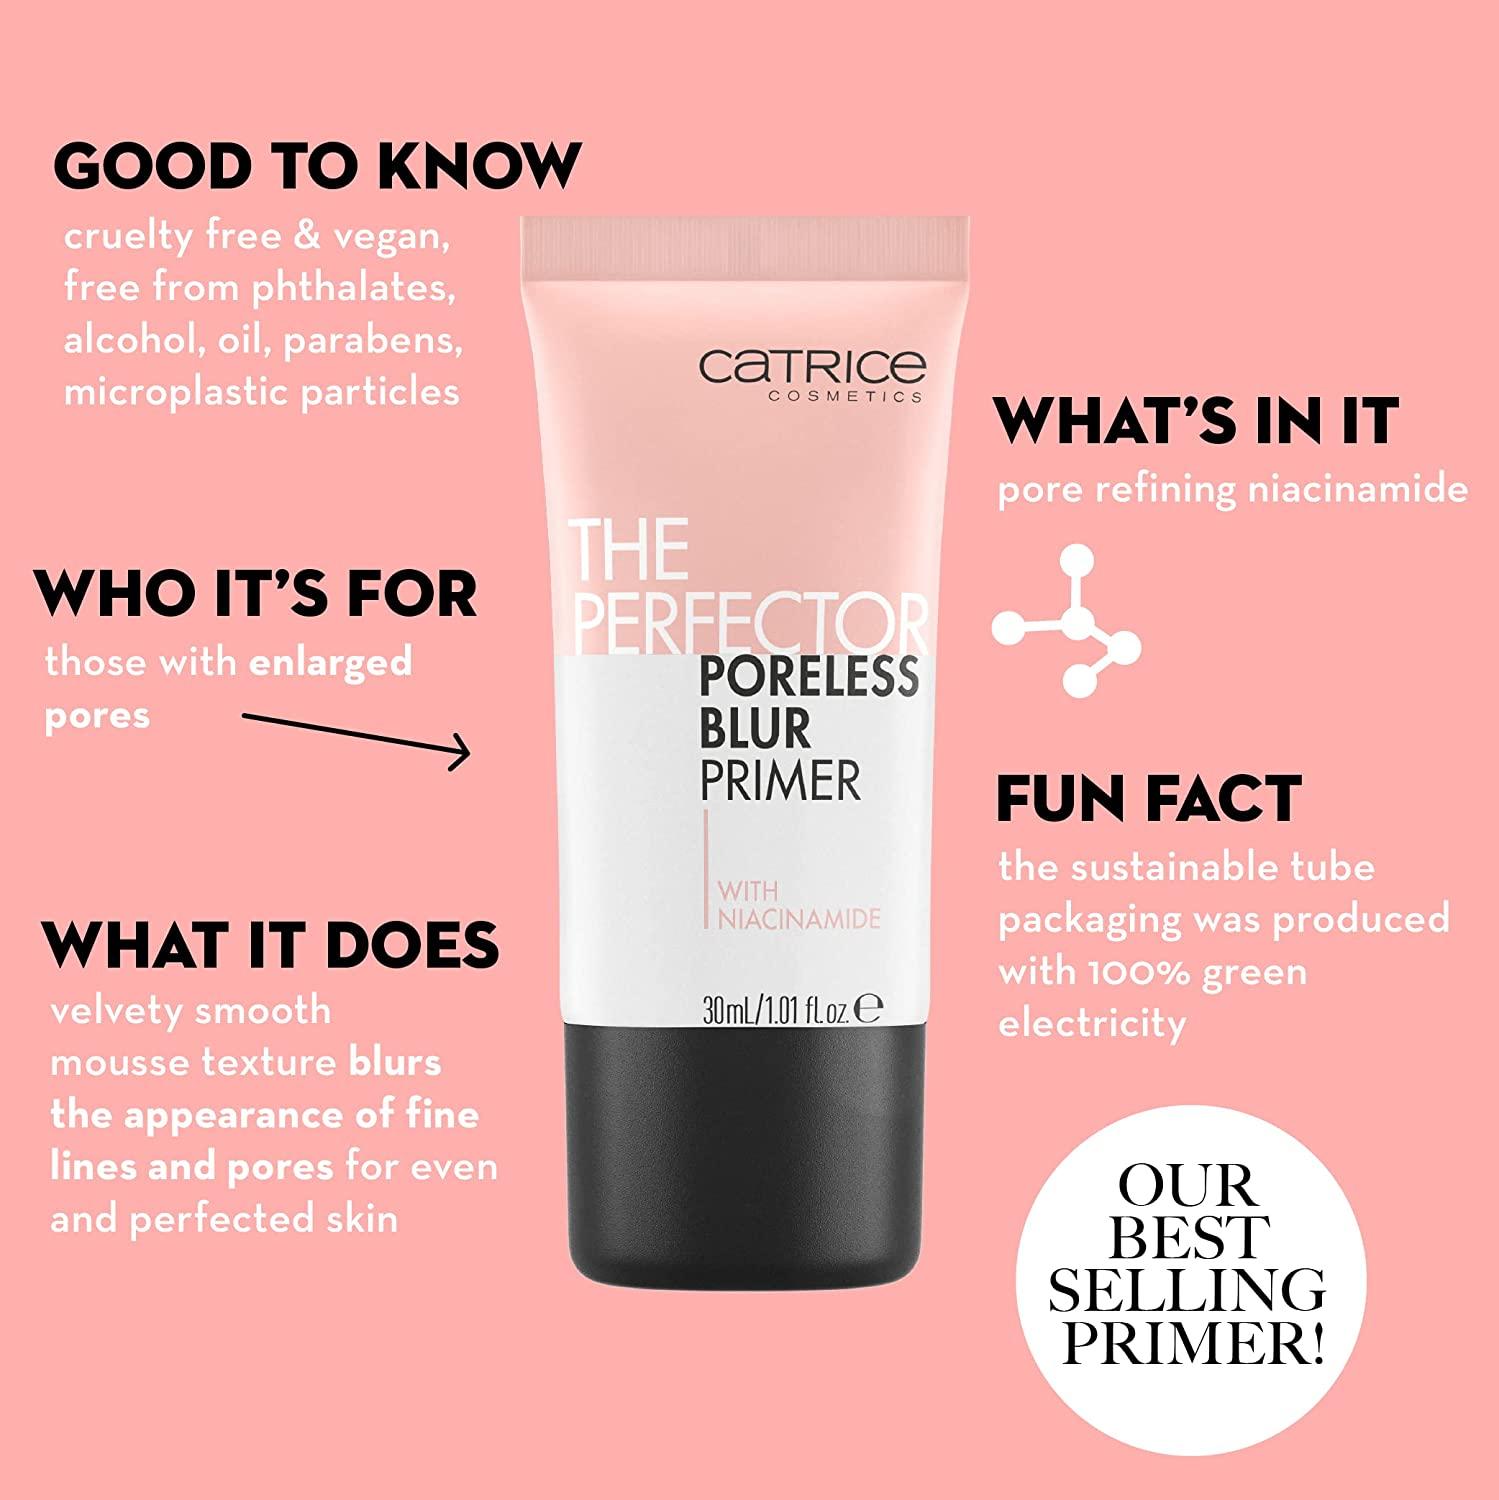 Catrice | The Perfector | Alcohol Refining Made Microplastics Parabens, Free Up | Without Primer | Base Cruelty Line Vegan Poreless & Niacinamide Oil, with Pore Fine Make & Fragrance, Gluten, Blur & Phthalates